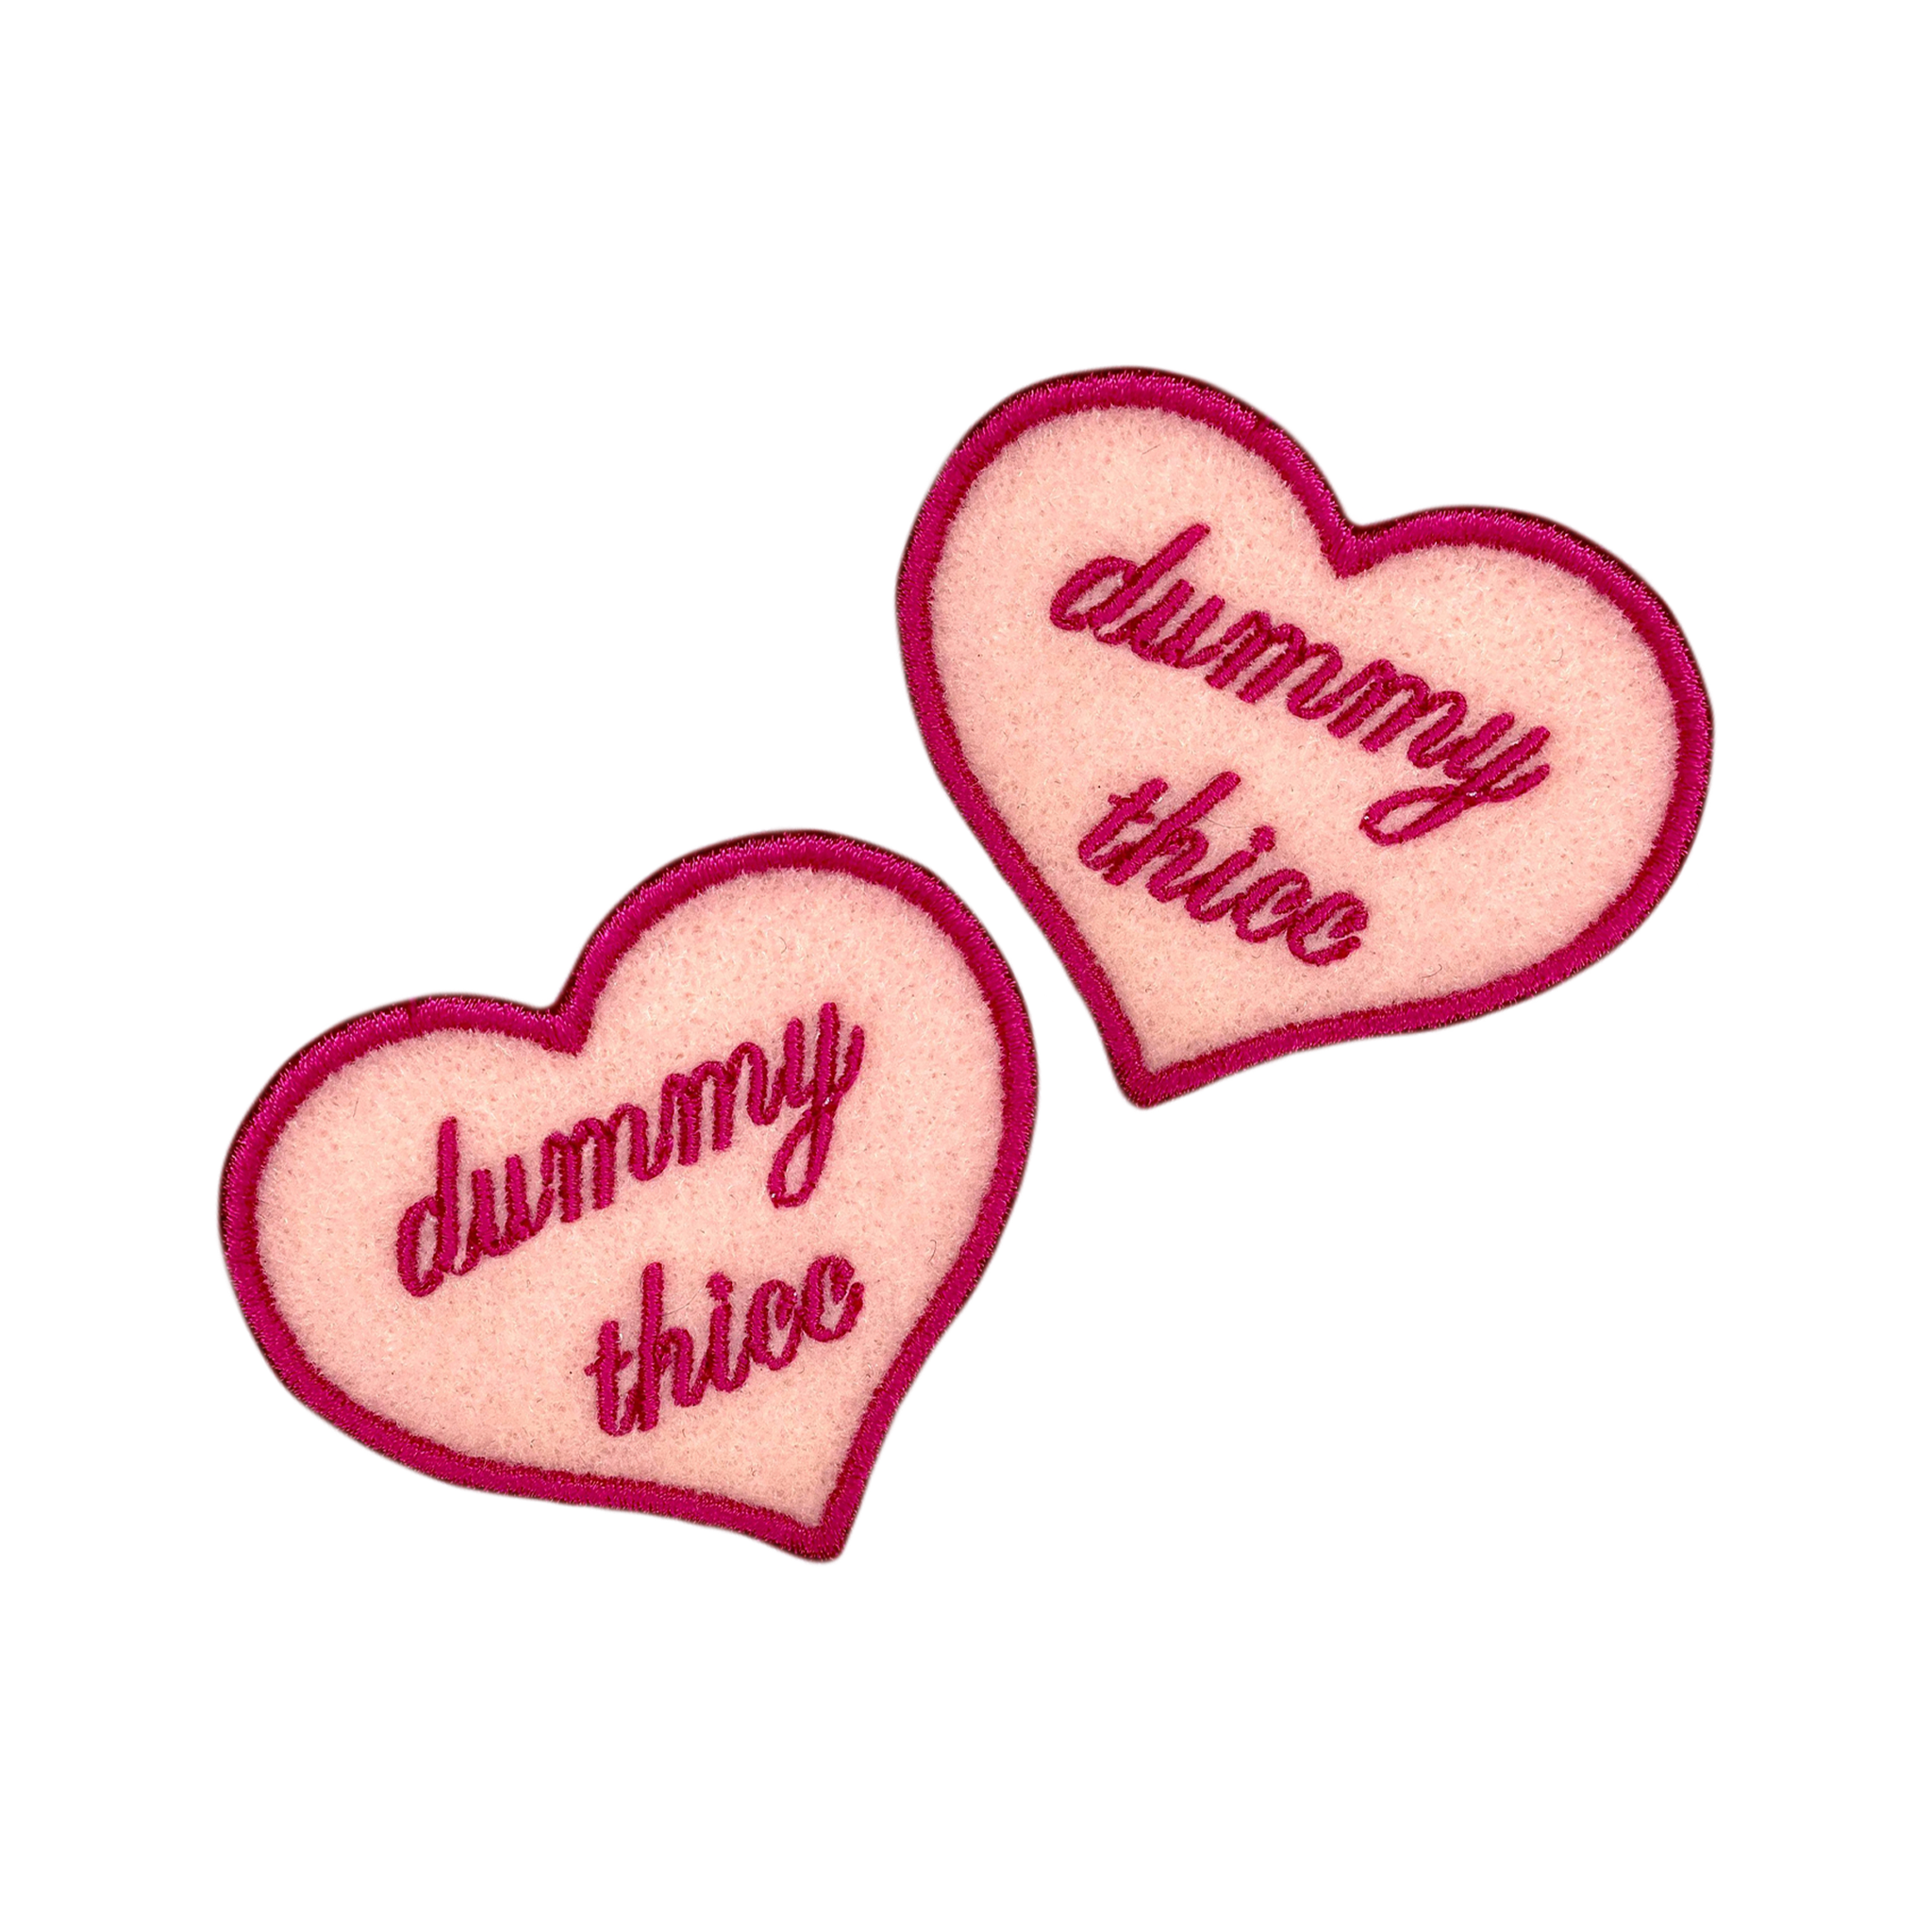 Dummy Thicc Embroidered Iron-on Patch - IncredibleGood Inc